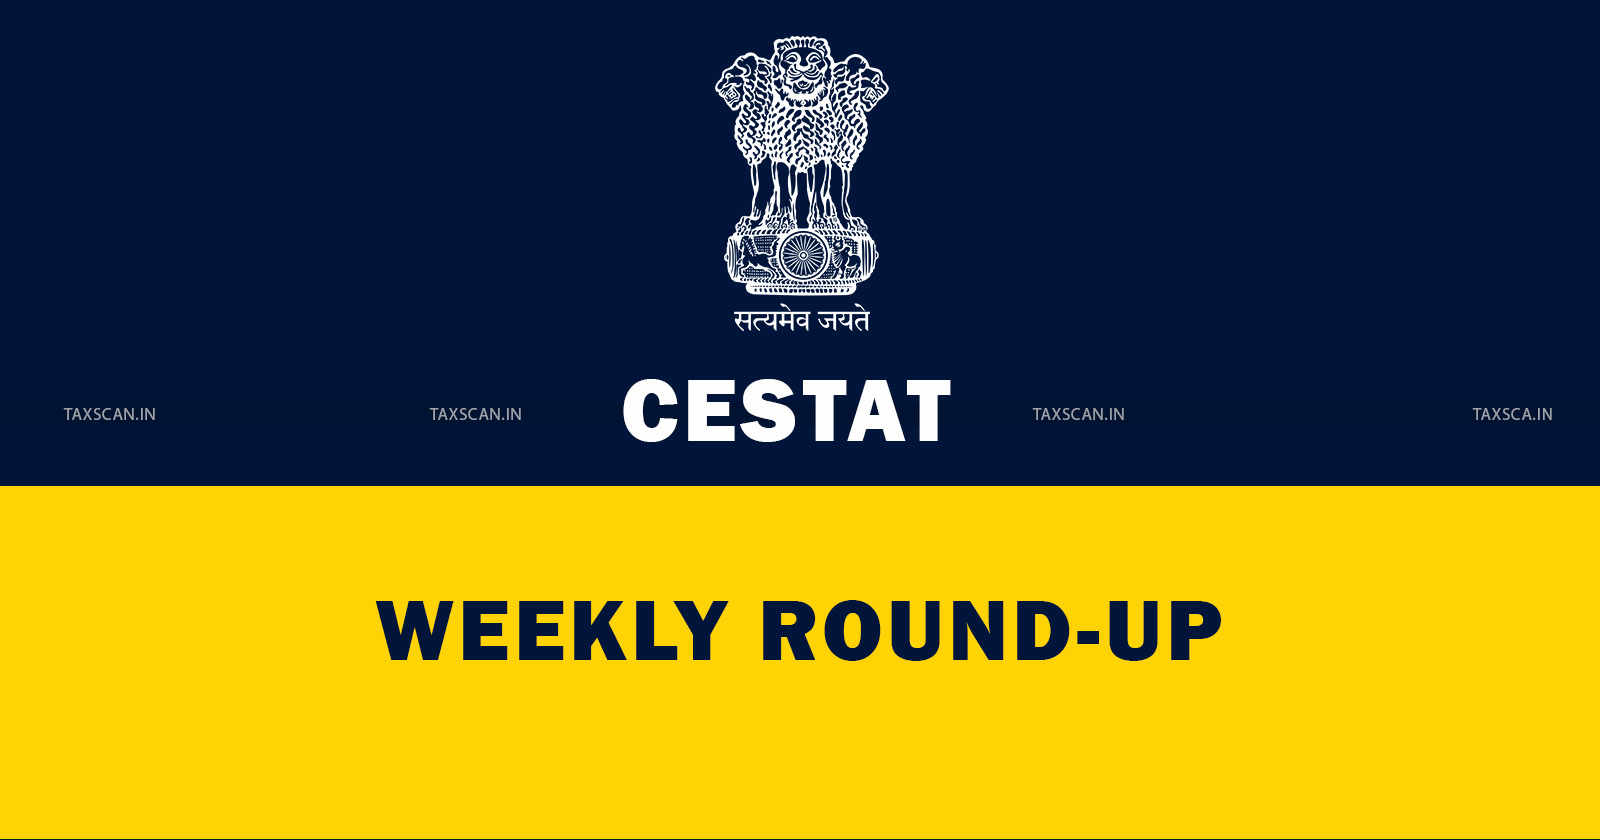 cestat - weekly roundup - cestat rounup - taxscan